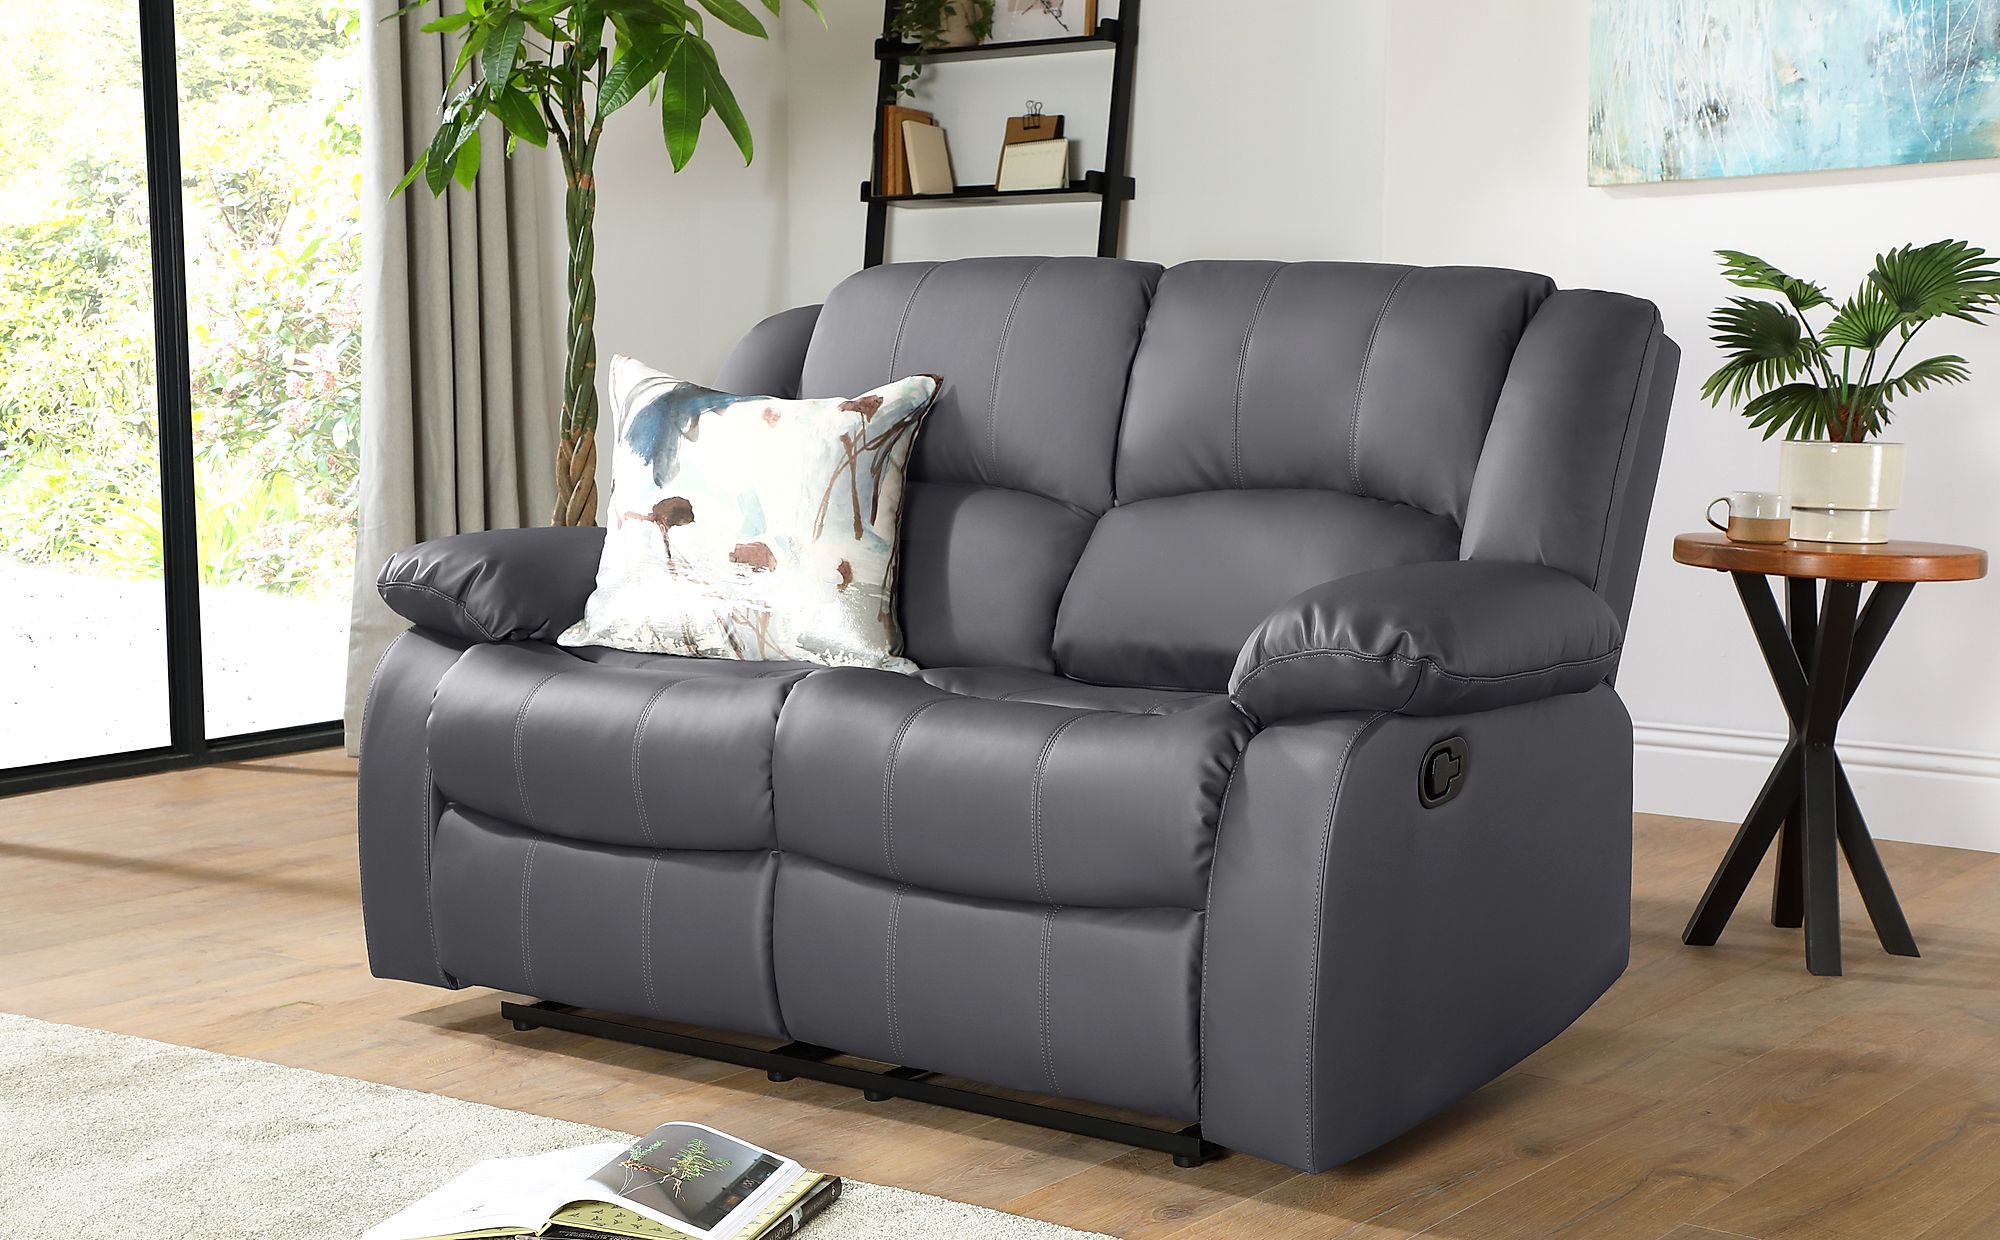 gray sofa with recliner Gray recliner sofa / $799.99 - Life Style Of ...